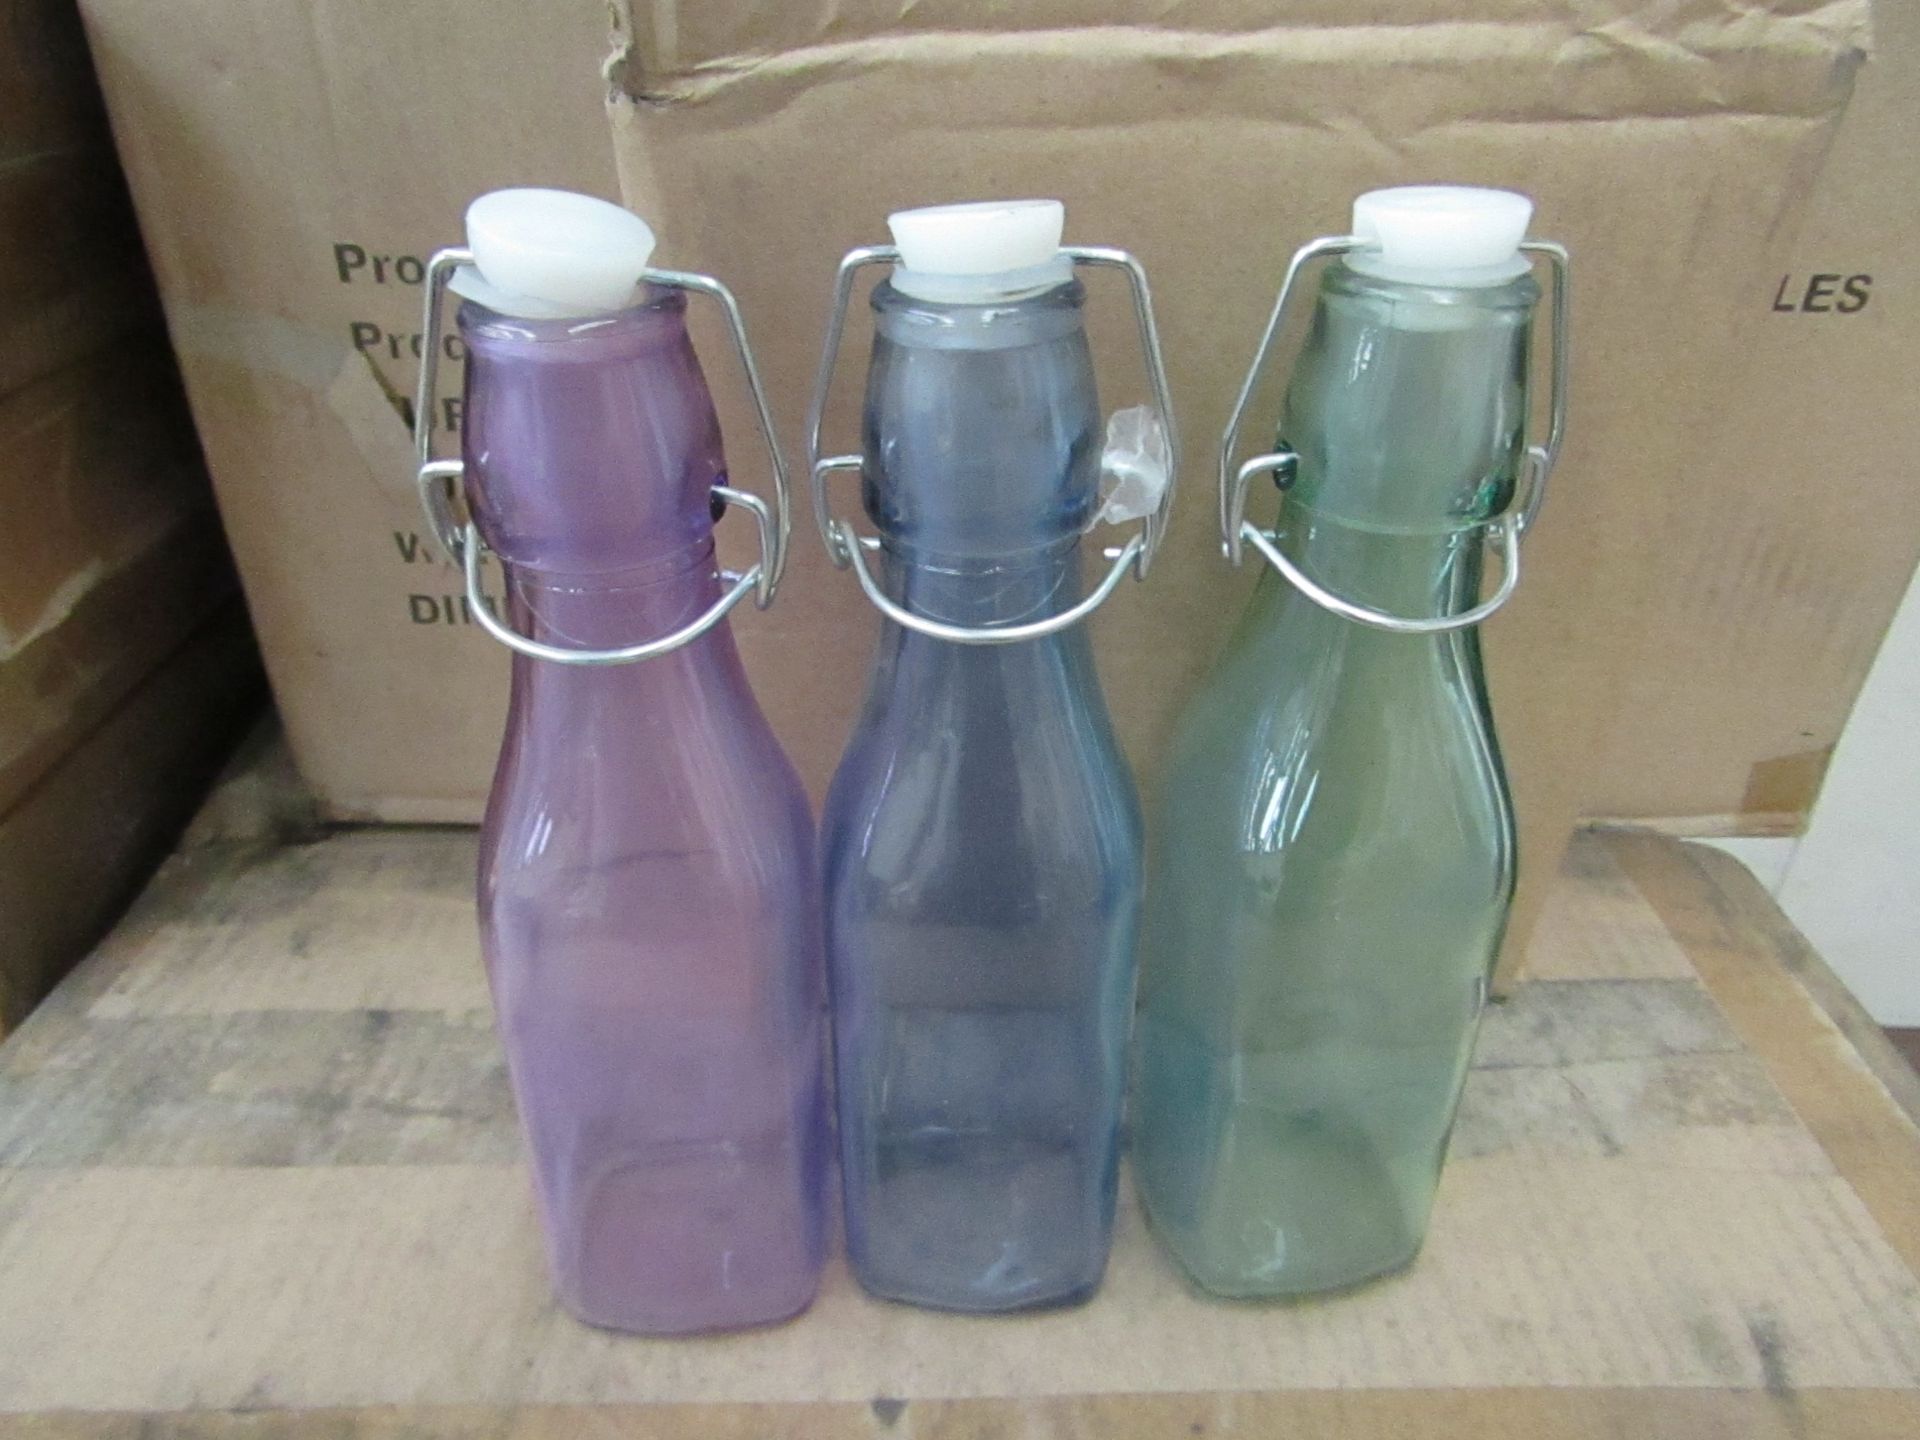 1x Box Containing 12 Sets Of 3 Being : Coloured Glass Bottles - 250ml - Please See Image For Design.